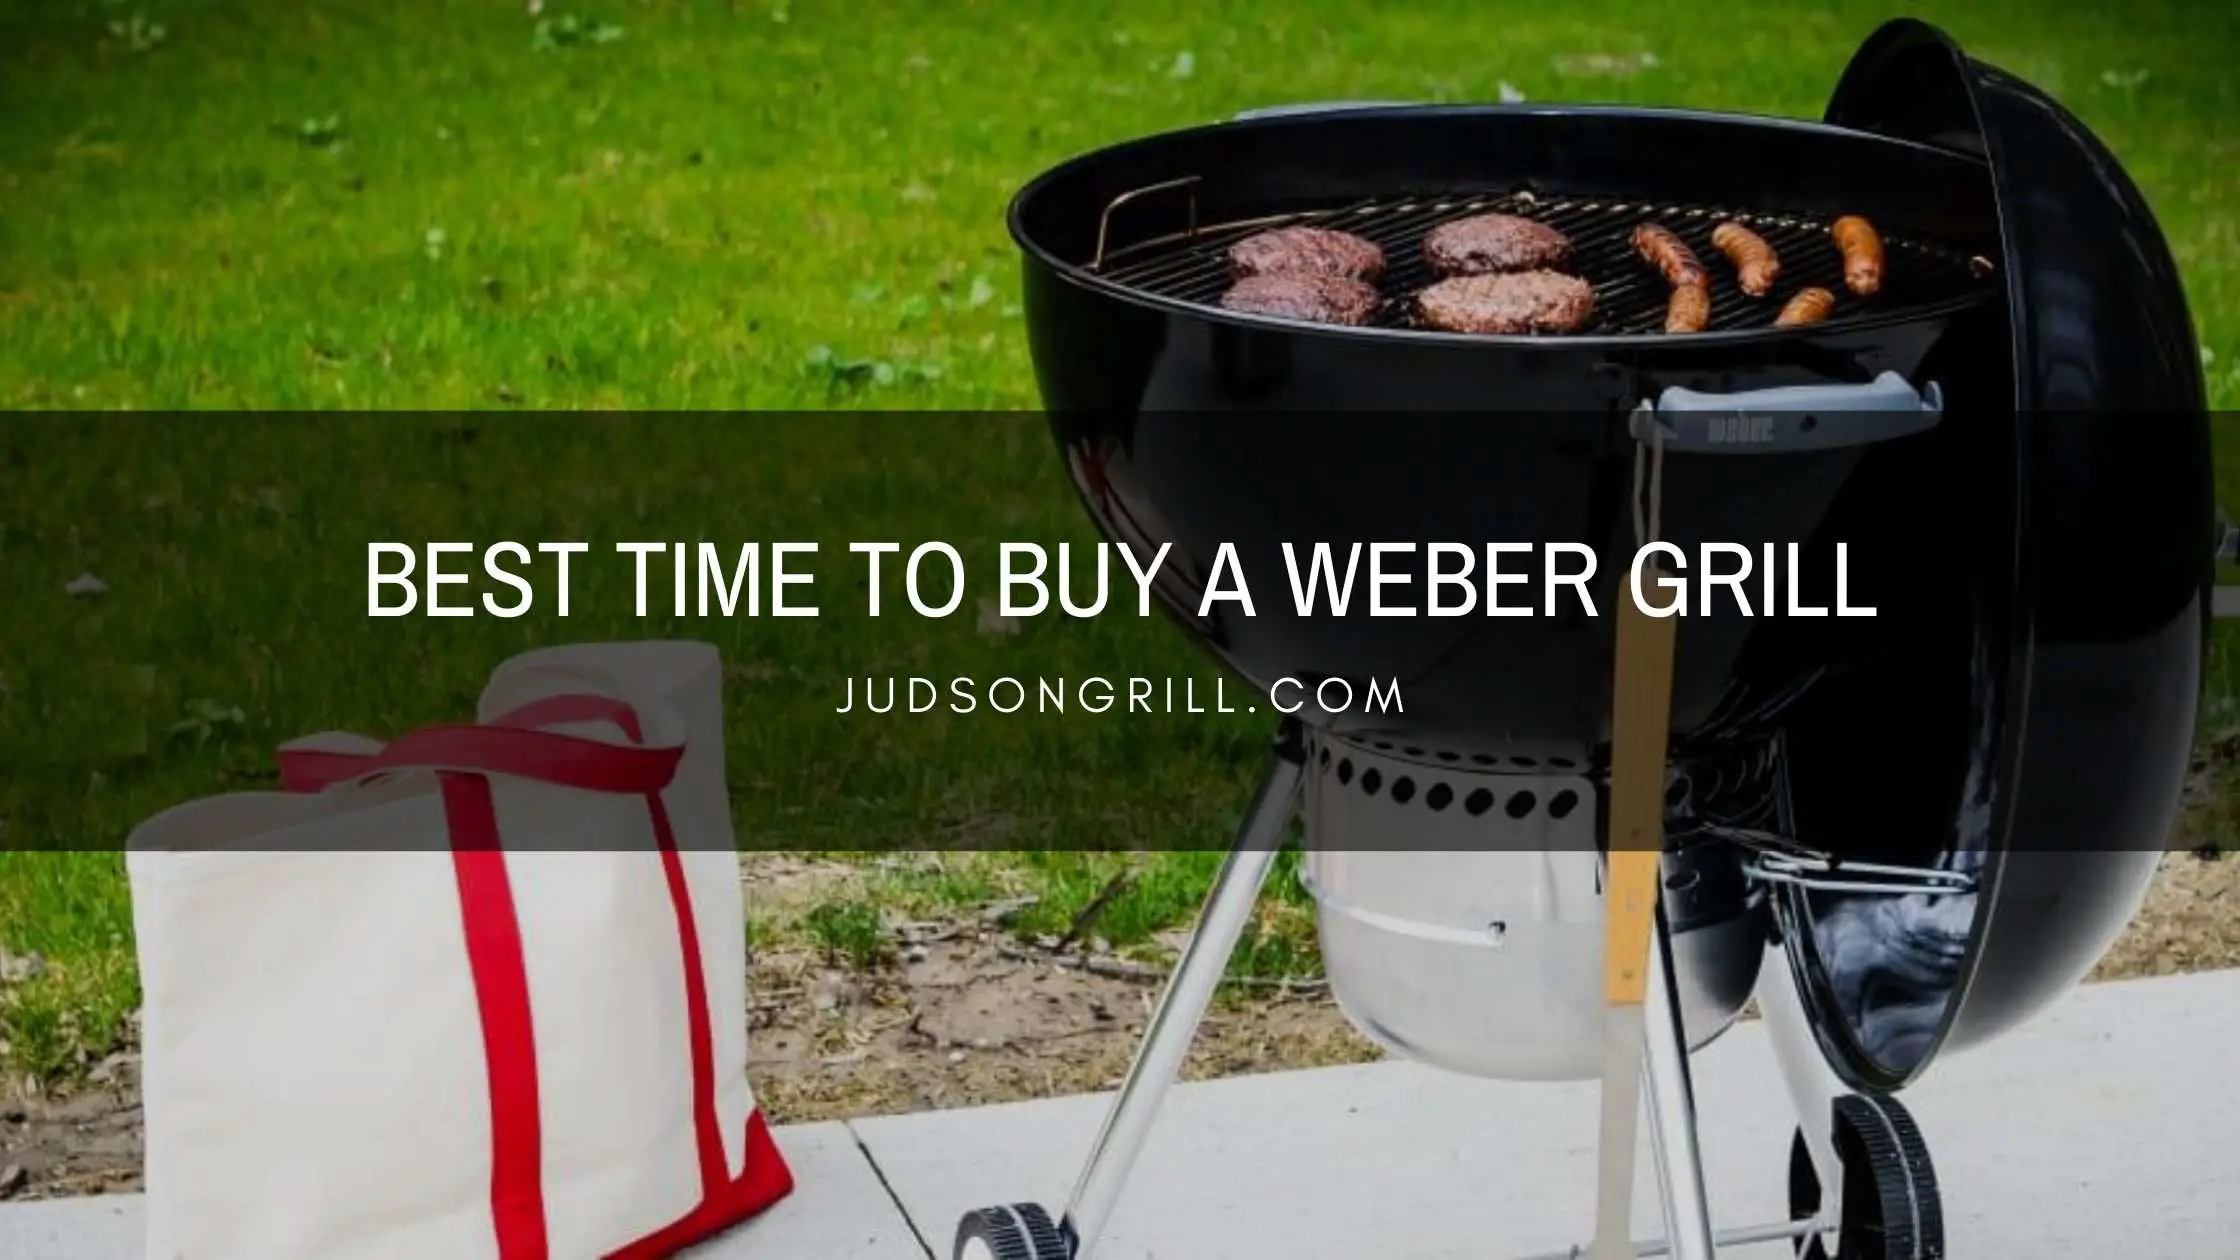 What is the Best Time to Buy a Weber Grill?